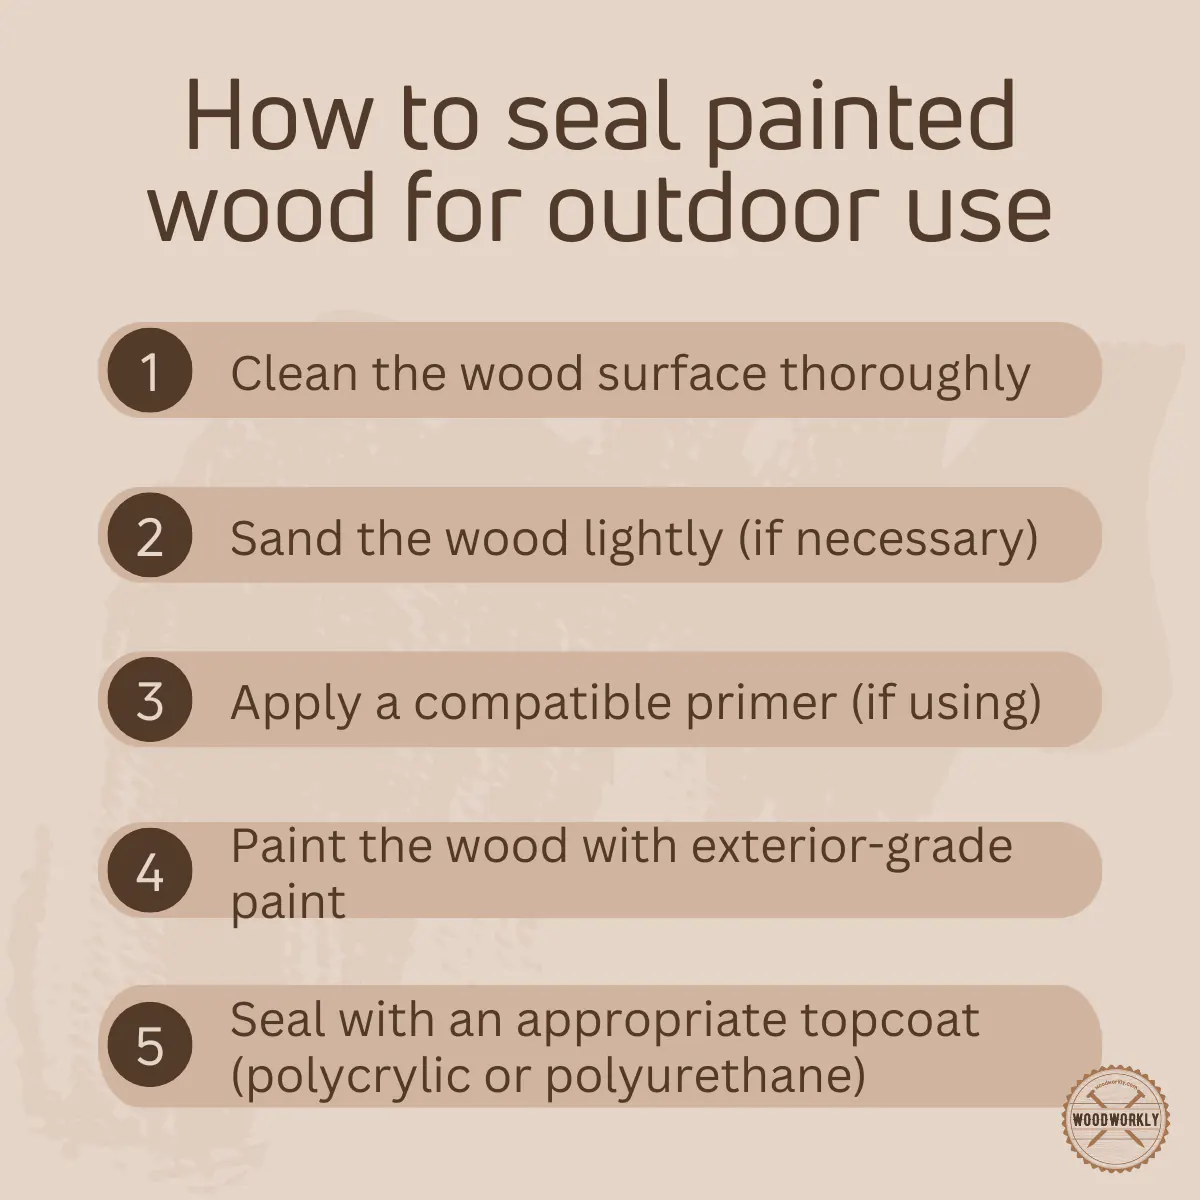 How to seal painted wood for outdoor use